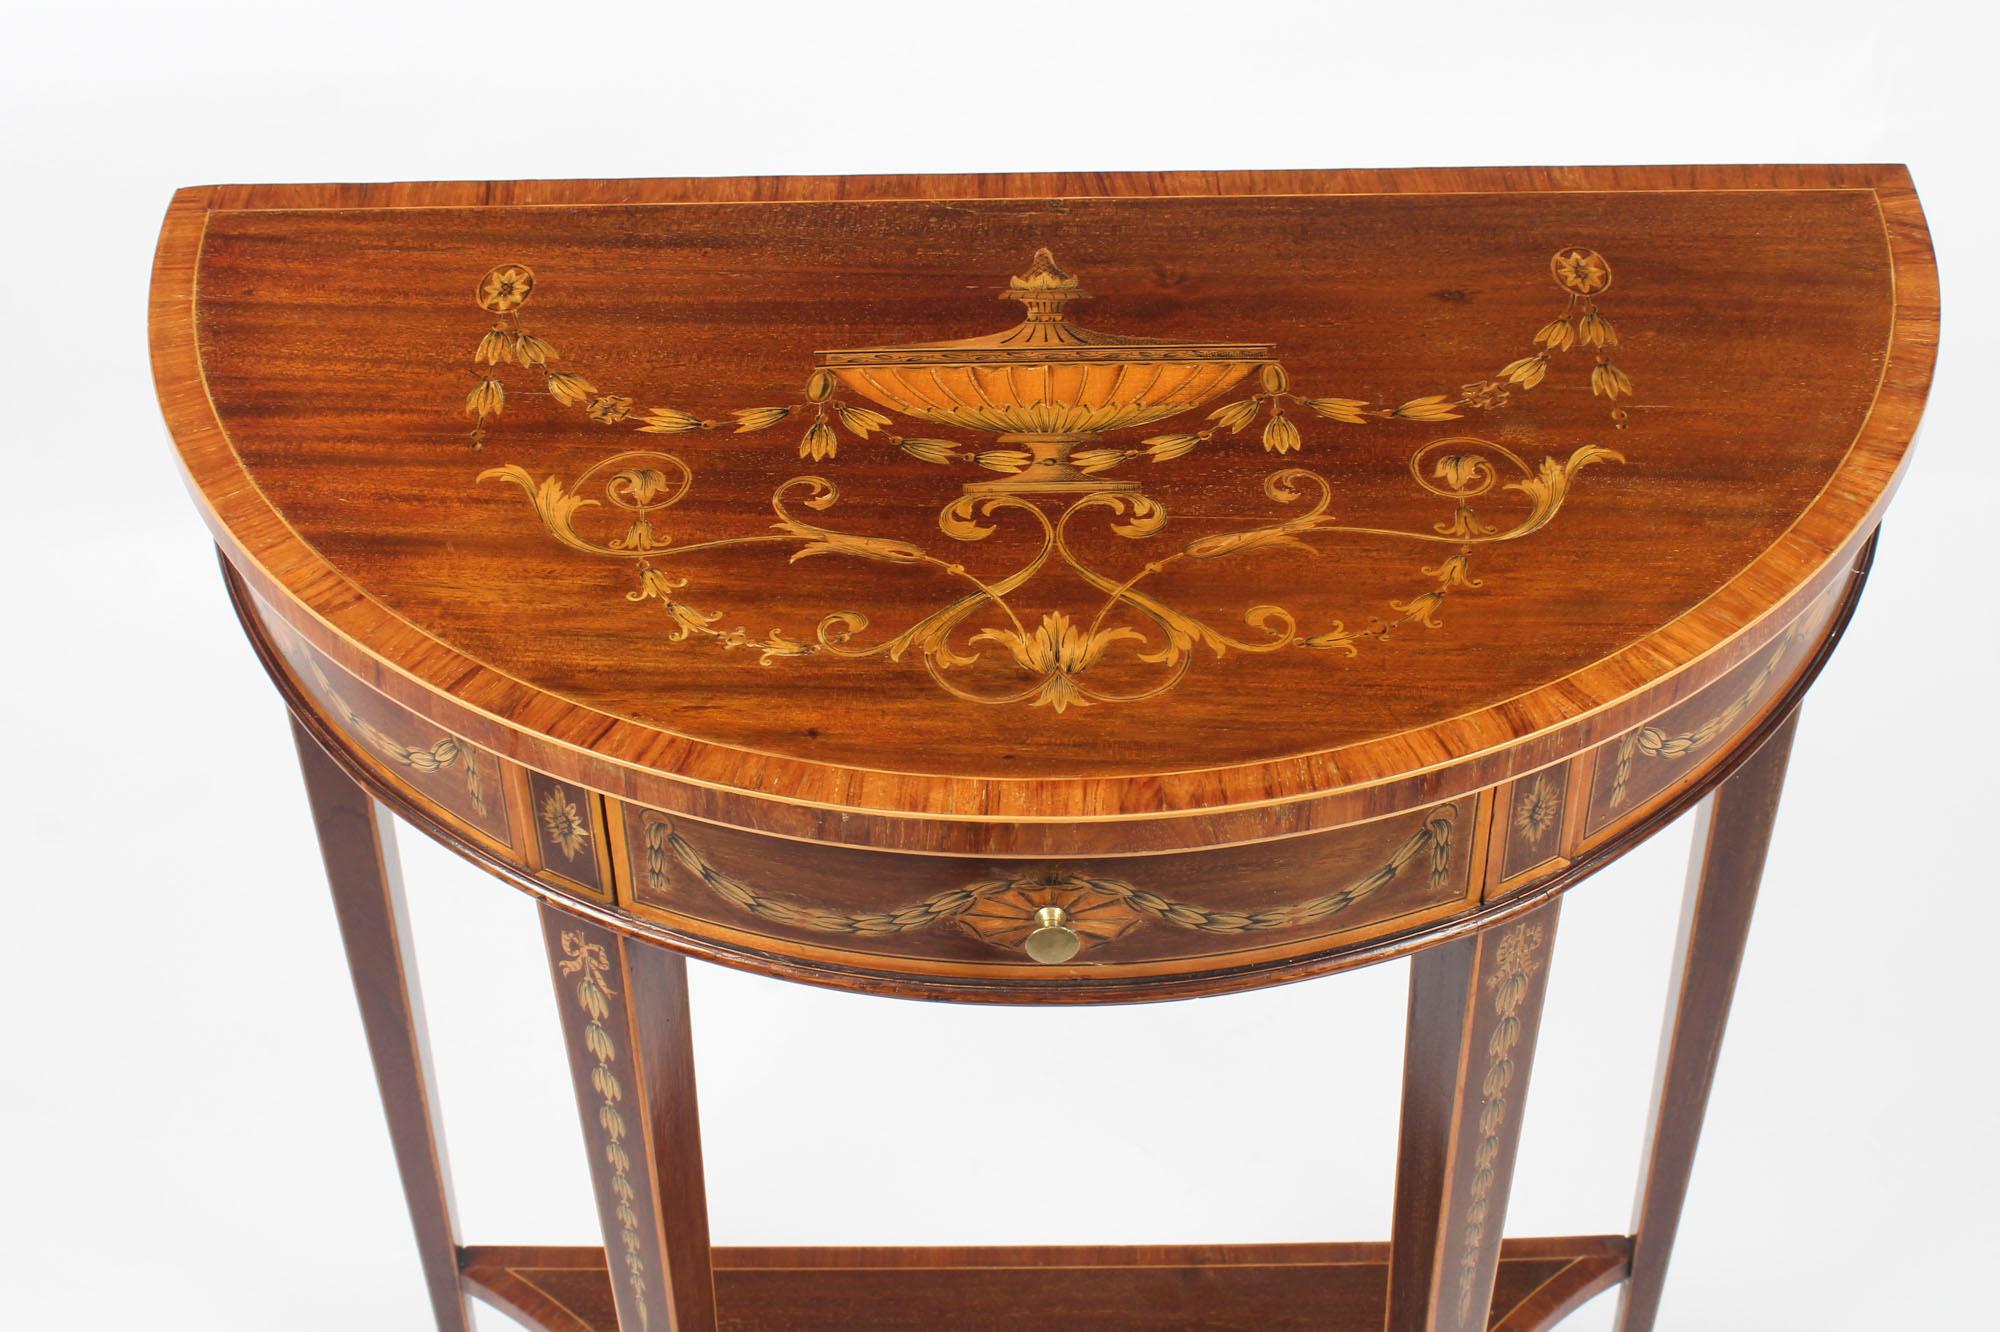 Regency Revival Antique Near Pair Demilune Mahogany & Marquetry Console Tables, 19th Century